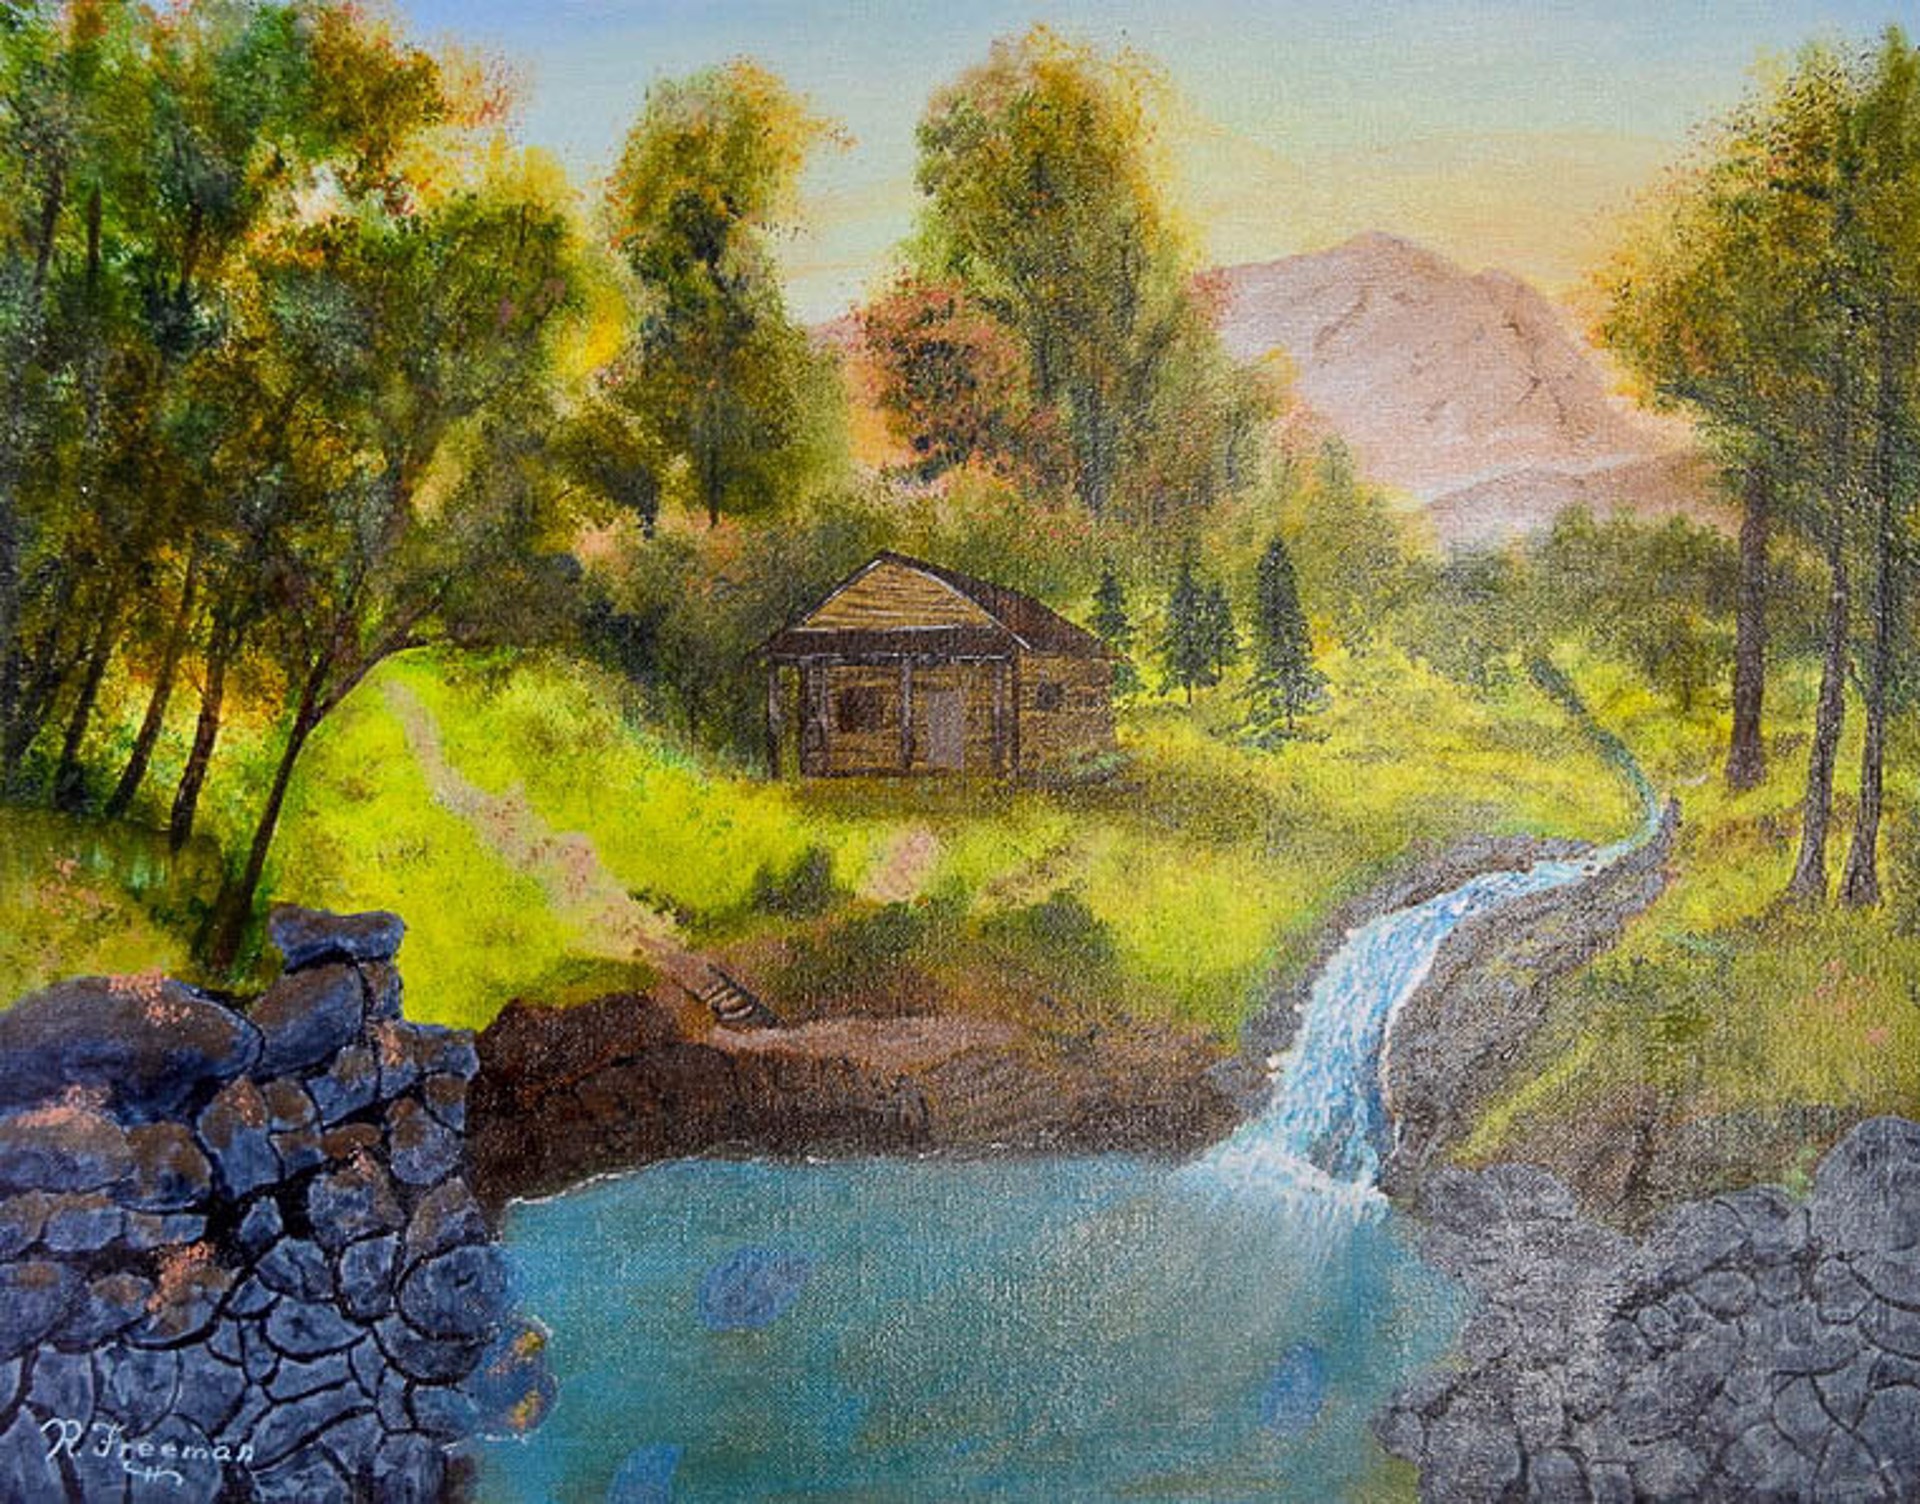 Cabin by the Pond by Robert Freeman